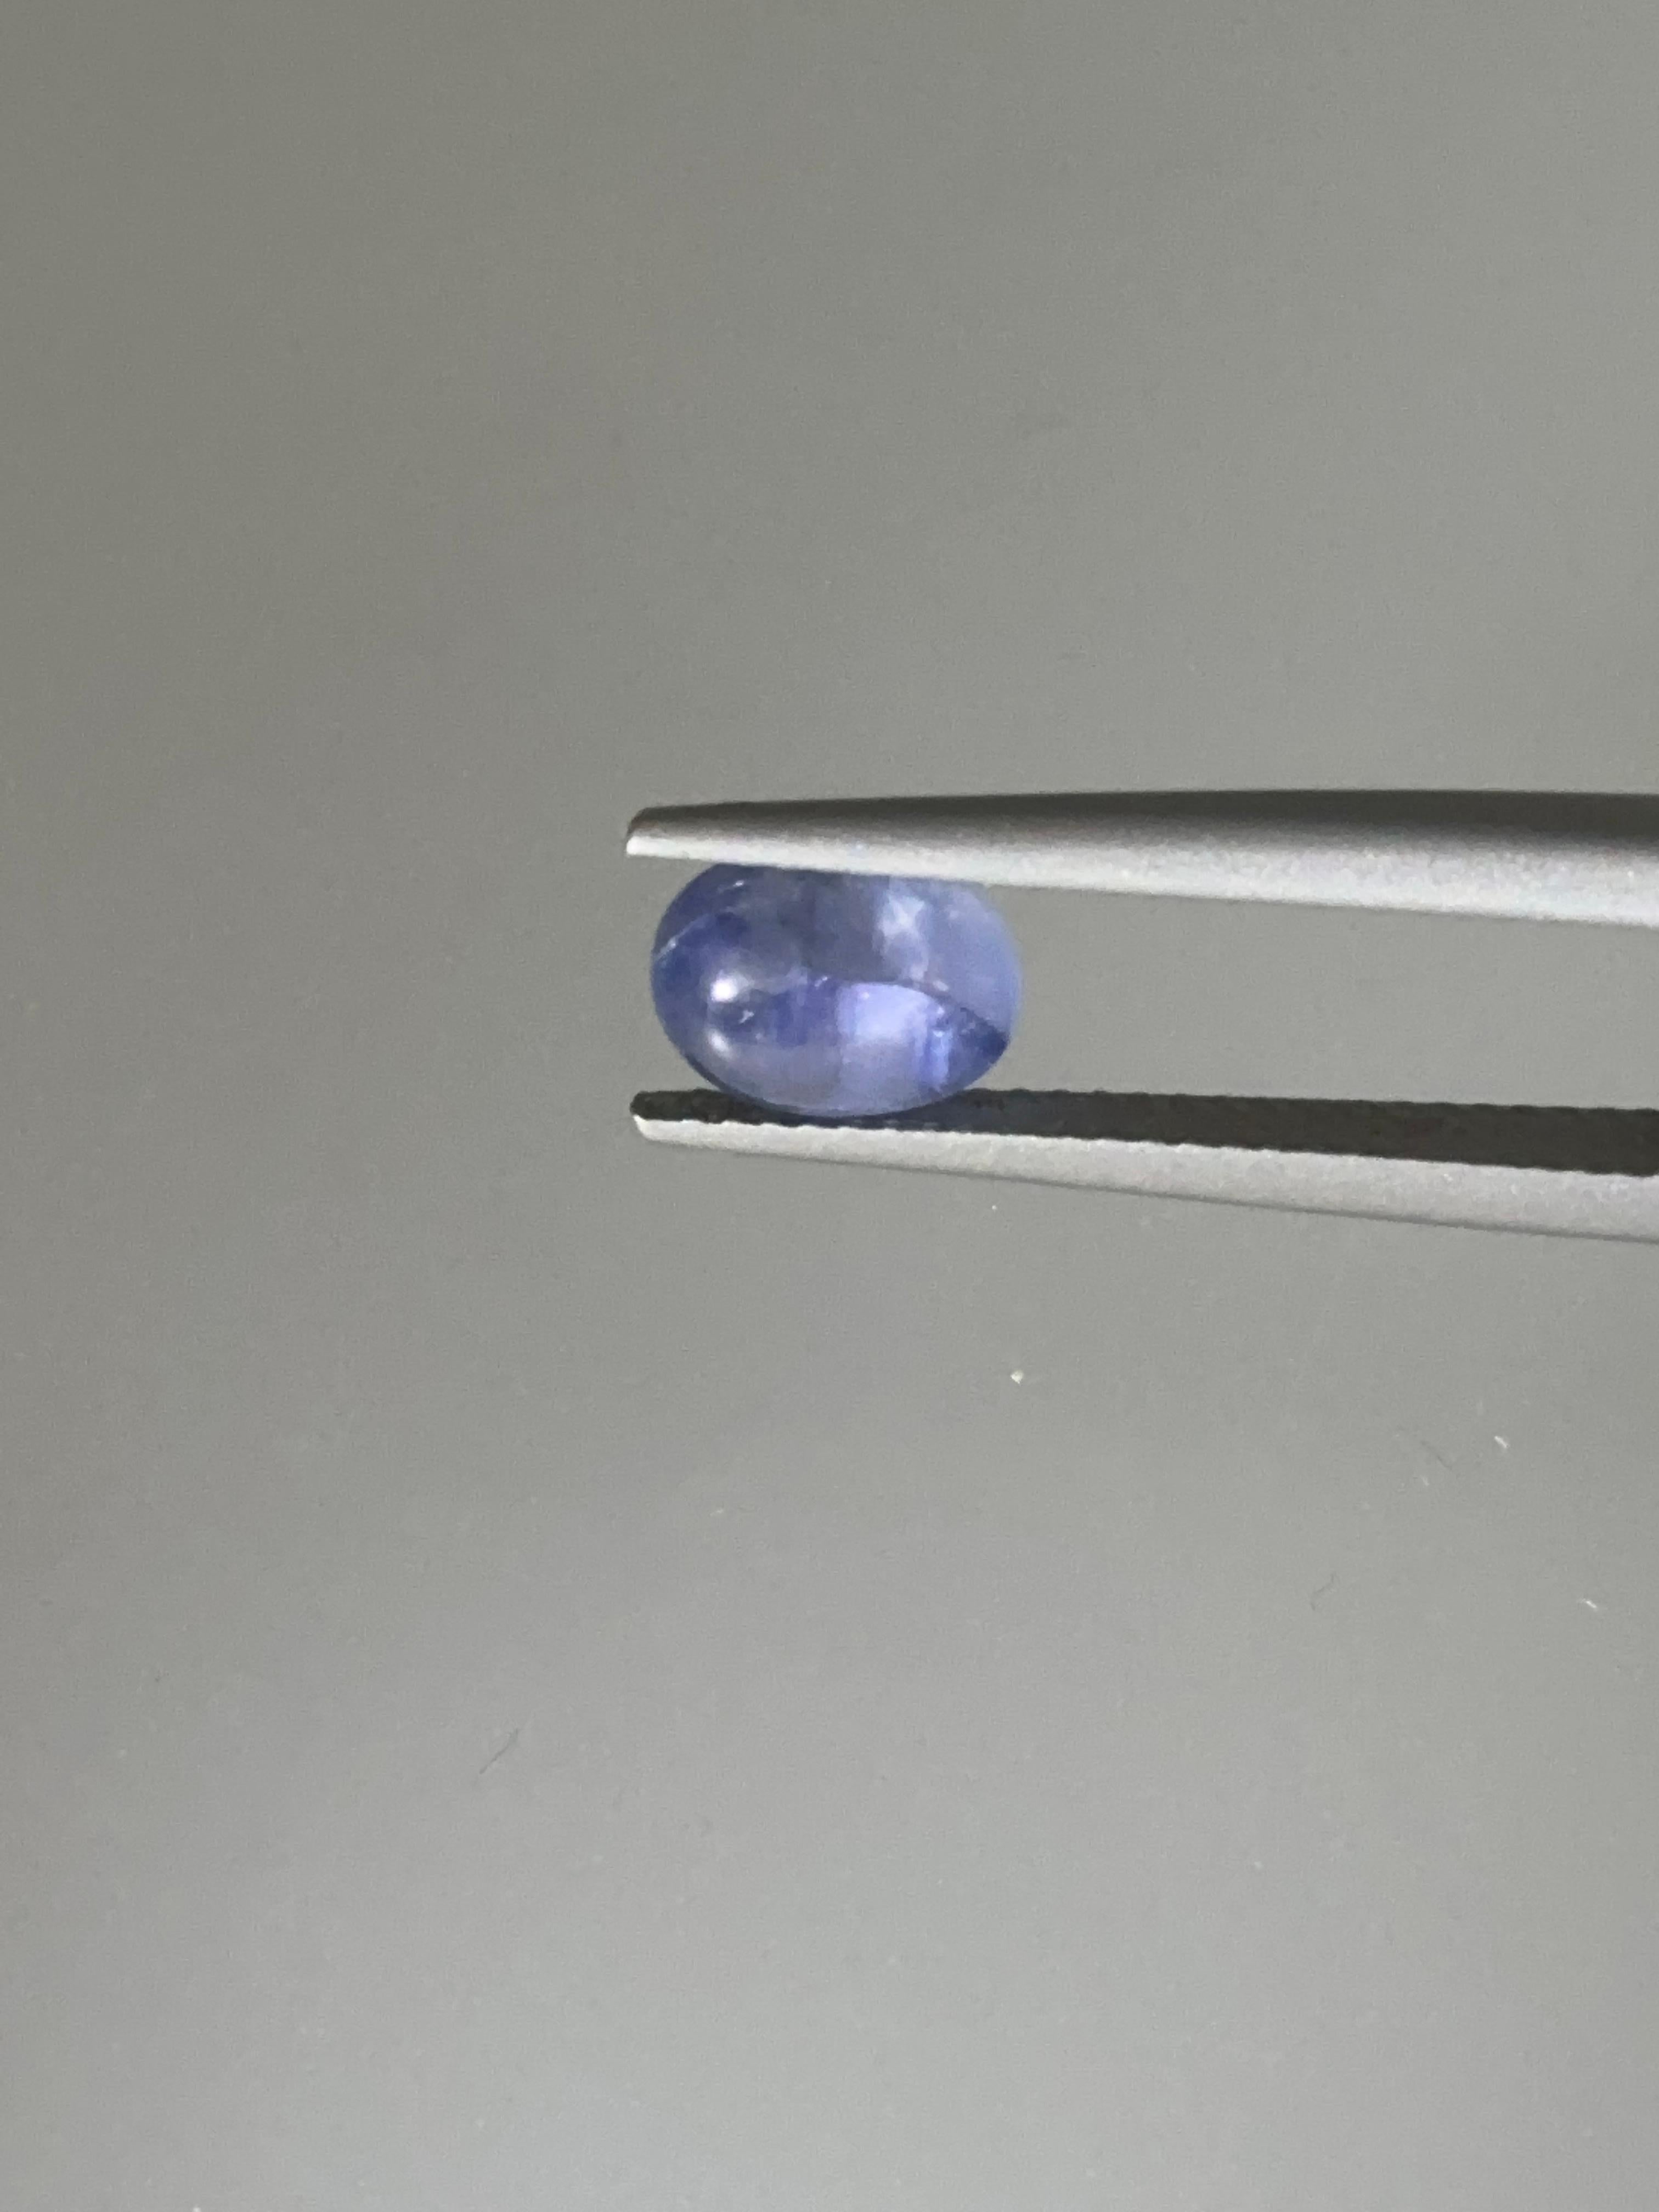 2.07 carat Oval Blue Cabochon Star Sapphire
Shape: Oval
Cut: Cabochon
Dimensions: 7.57 x 6.09 x 4.36 mm
Color: A light but yet prominent pastel-like blue.
Weight: 2.07 Carat
No Heat/Treatment
The stone's Asterism/Star Effect is not so prevalent but